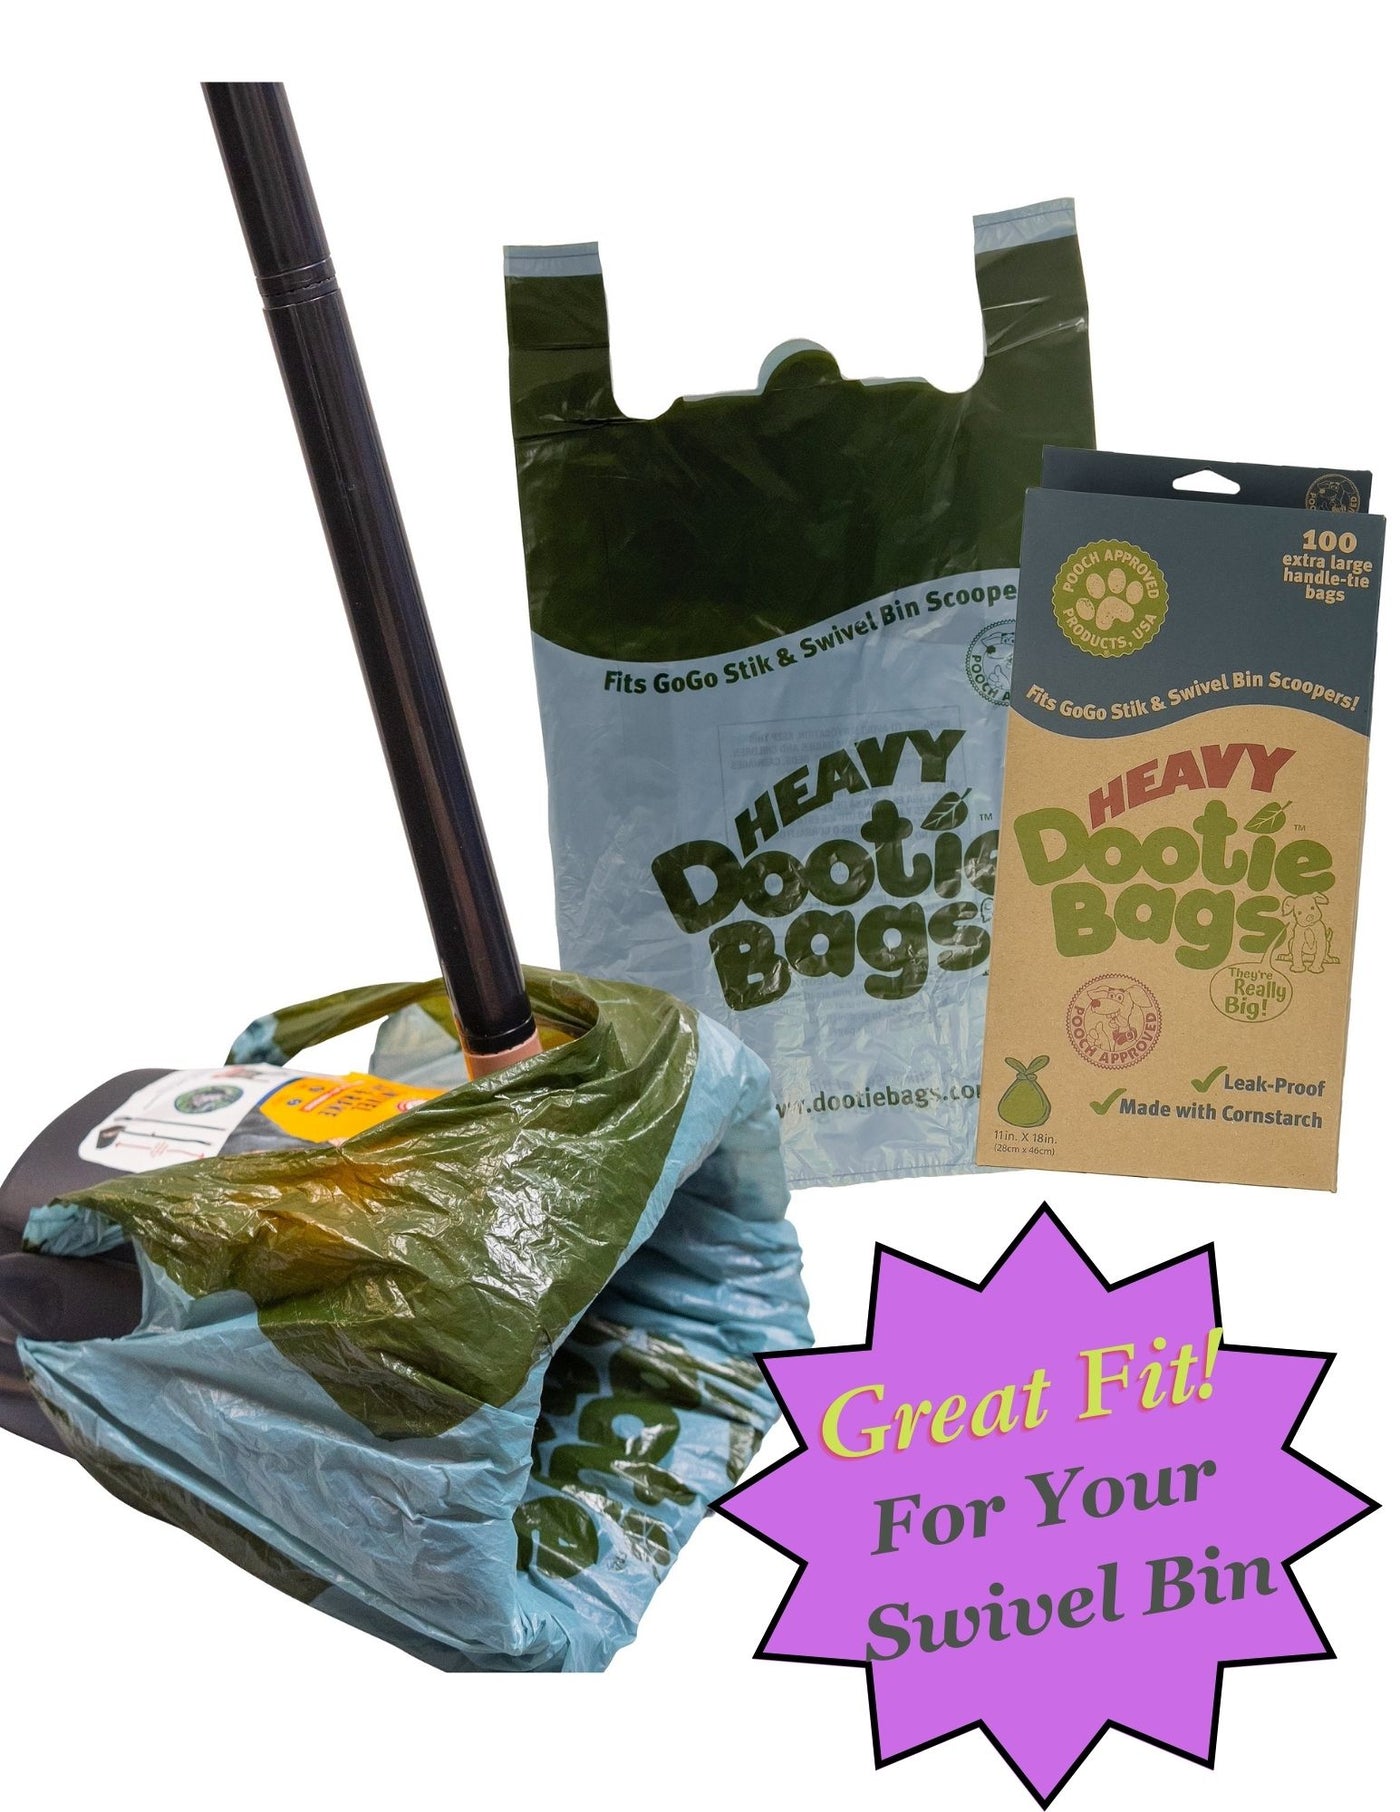 HEAVY Dootie Bags™, VERY LARGE E-Z Tie Handle Poop Bags Made with Corn Starch. Fits GoGo Stik and Swivel Bin Pooper Scoopers, Use for Kitty Litter Cleanup, 100 Count